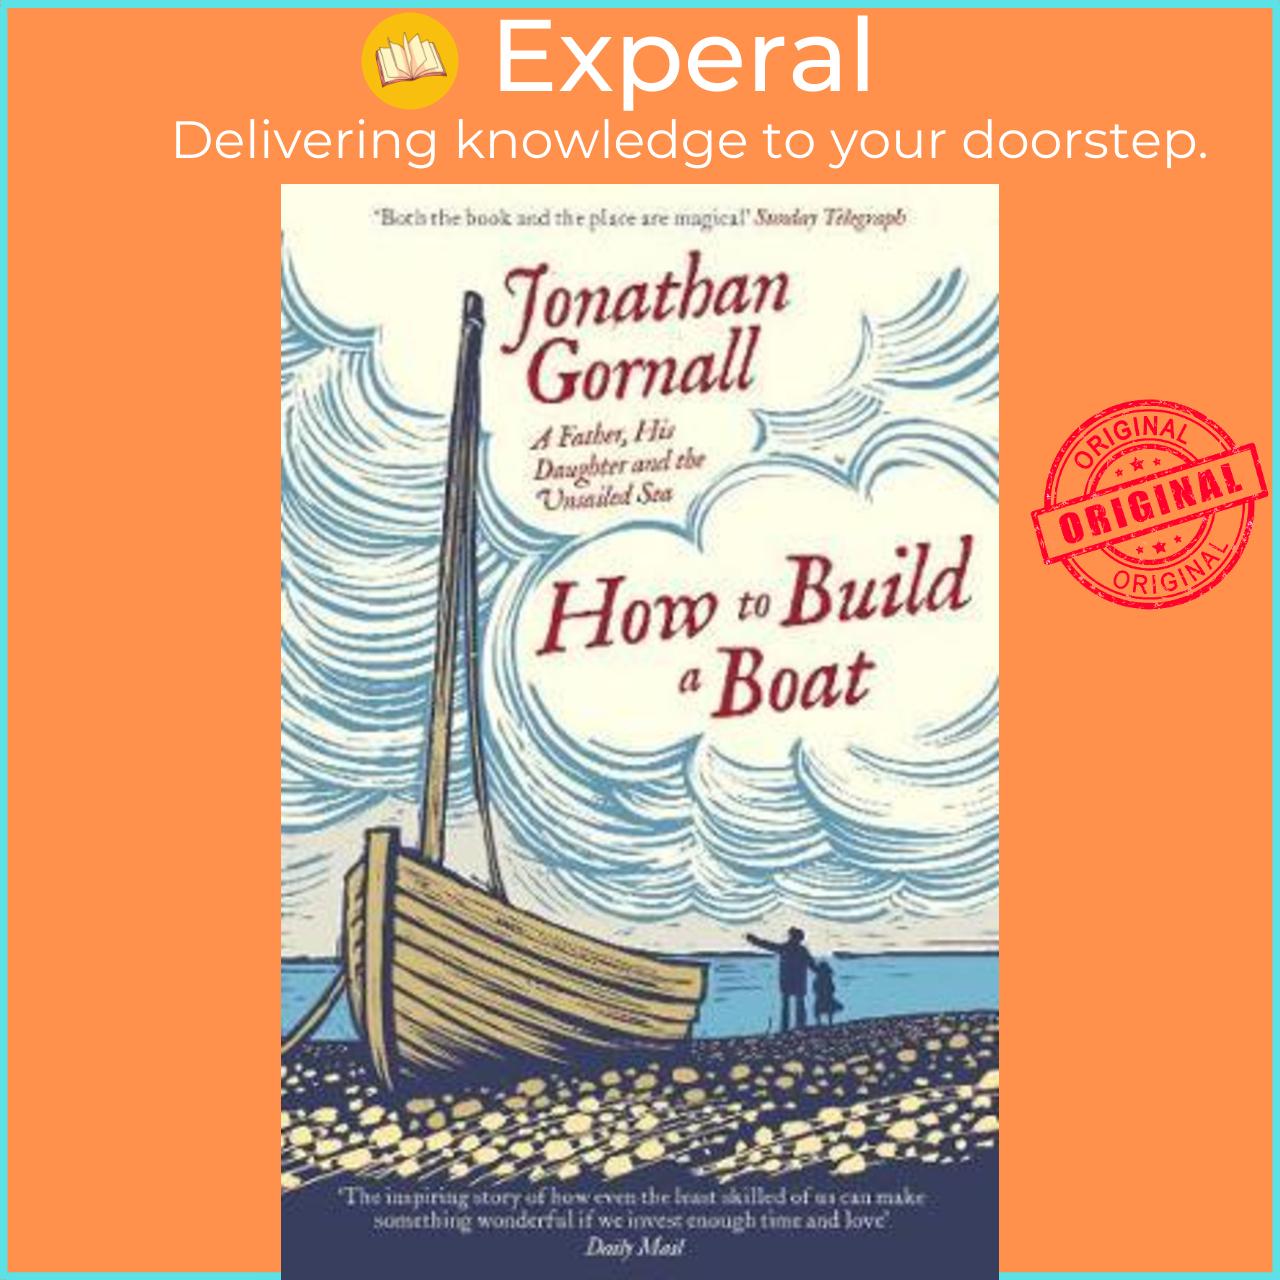 Sách - How To Build A Boat : A Father, his Daughter, and the Unsailed Sea by Jonathan Gornall (UK edition, paperback)